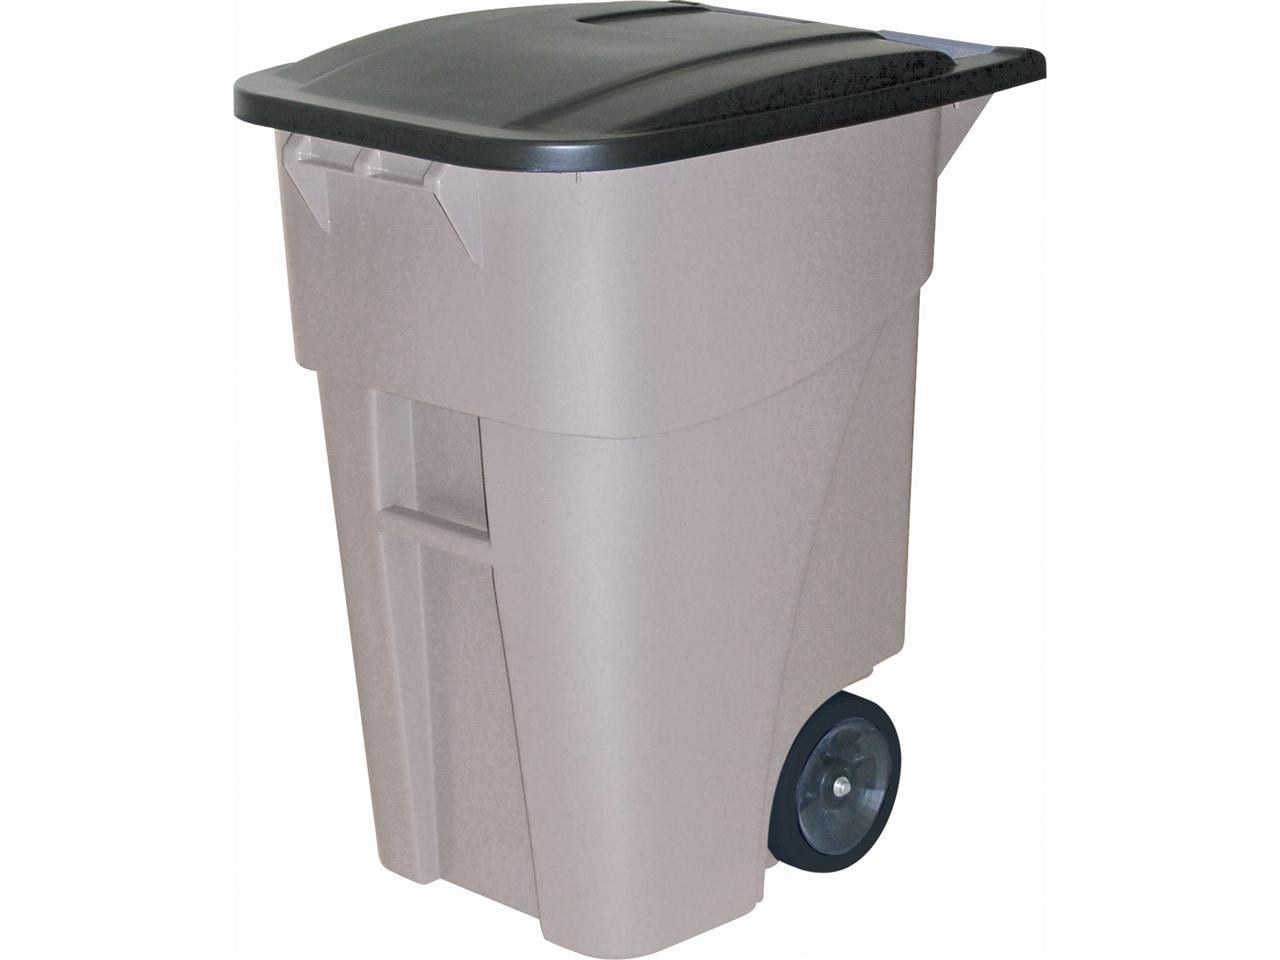 Rubbermaid Commercial Brute 50 Gal. Rollout Trash Can with Lid– onestepclub